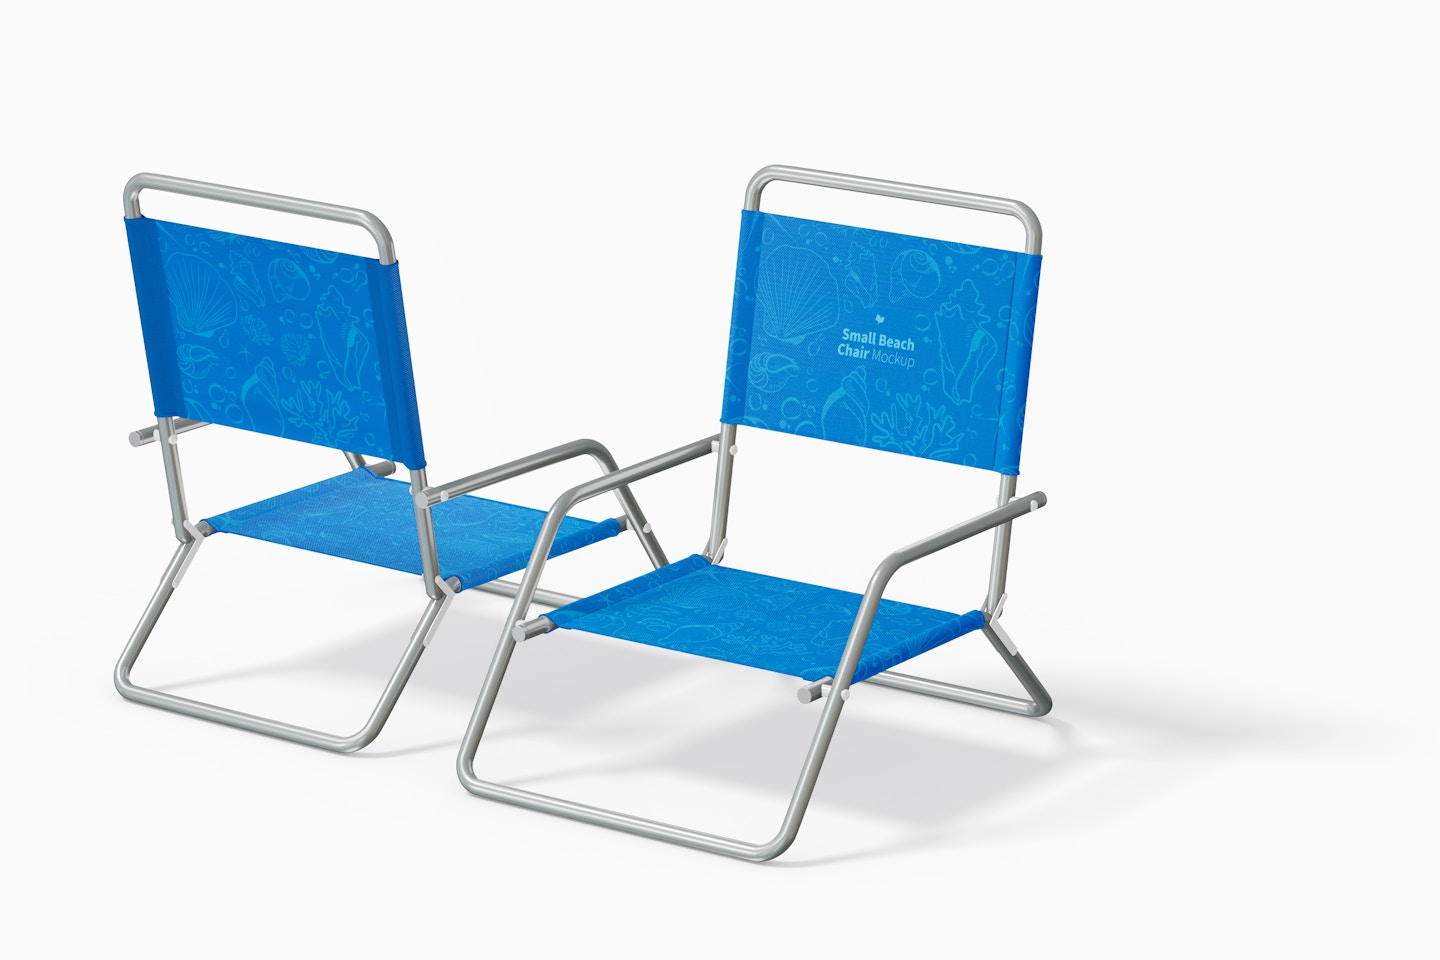 Small Beach Chairs Mockup, Perspective